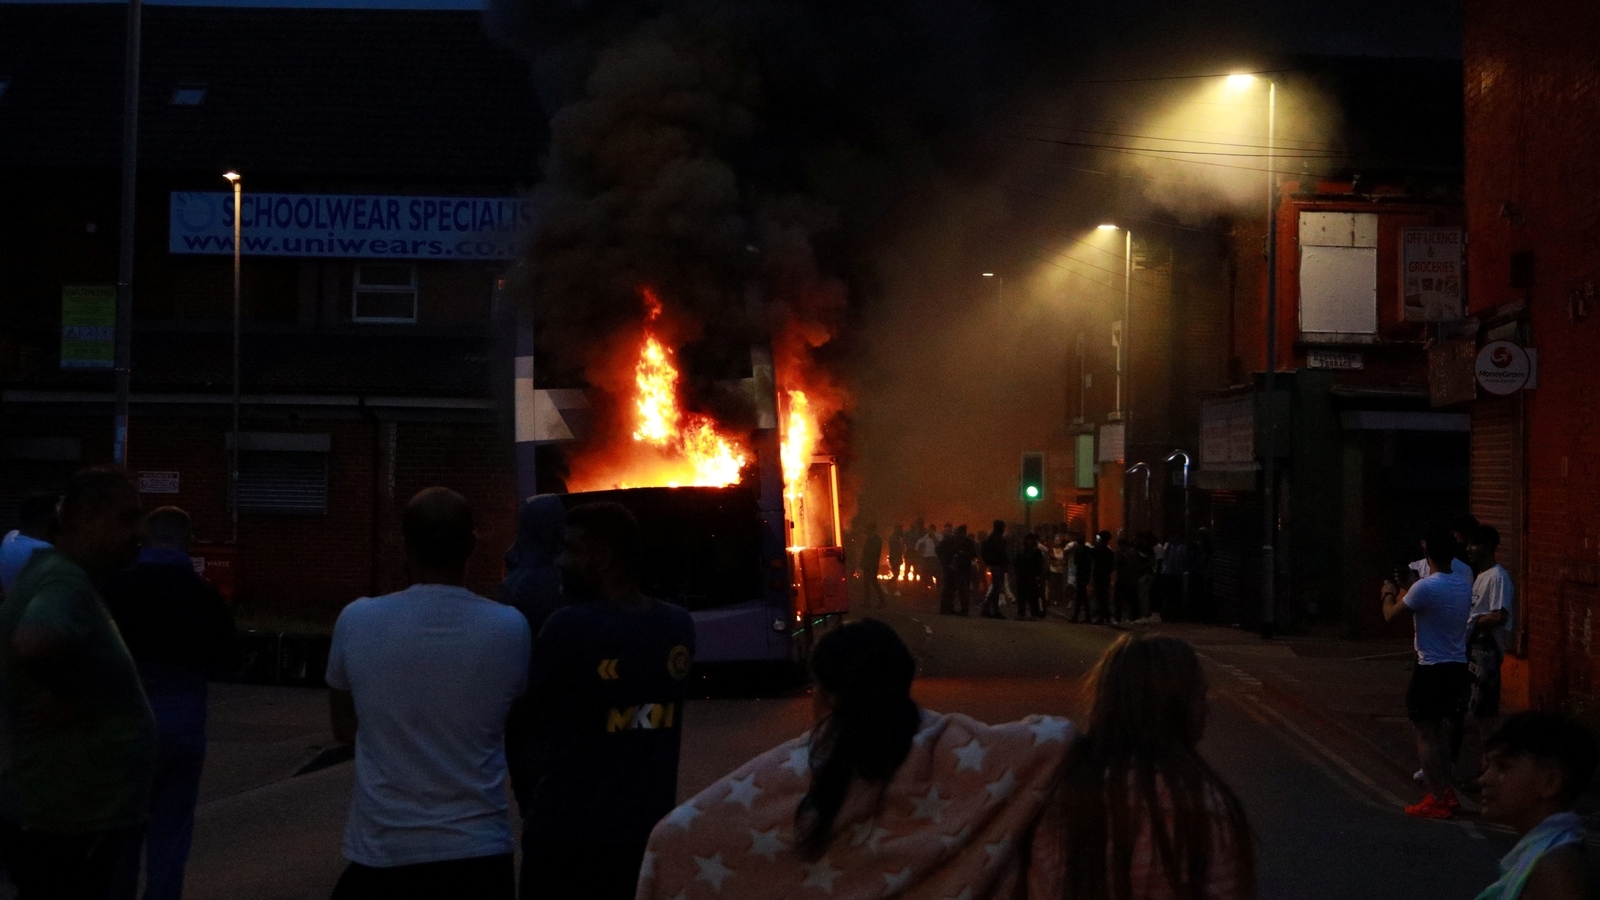 Leeds riots: Bus set on fire, police car overturned. What’s happening in UK city?